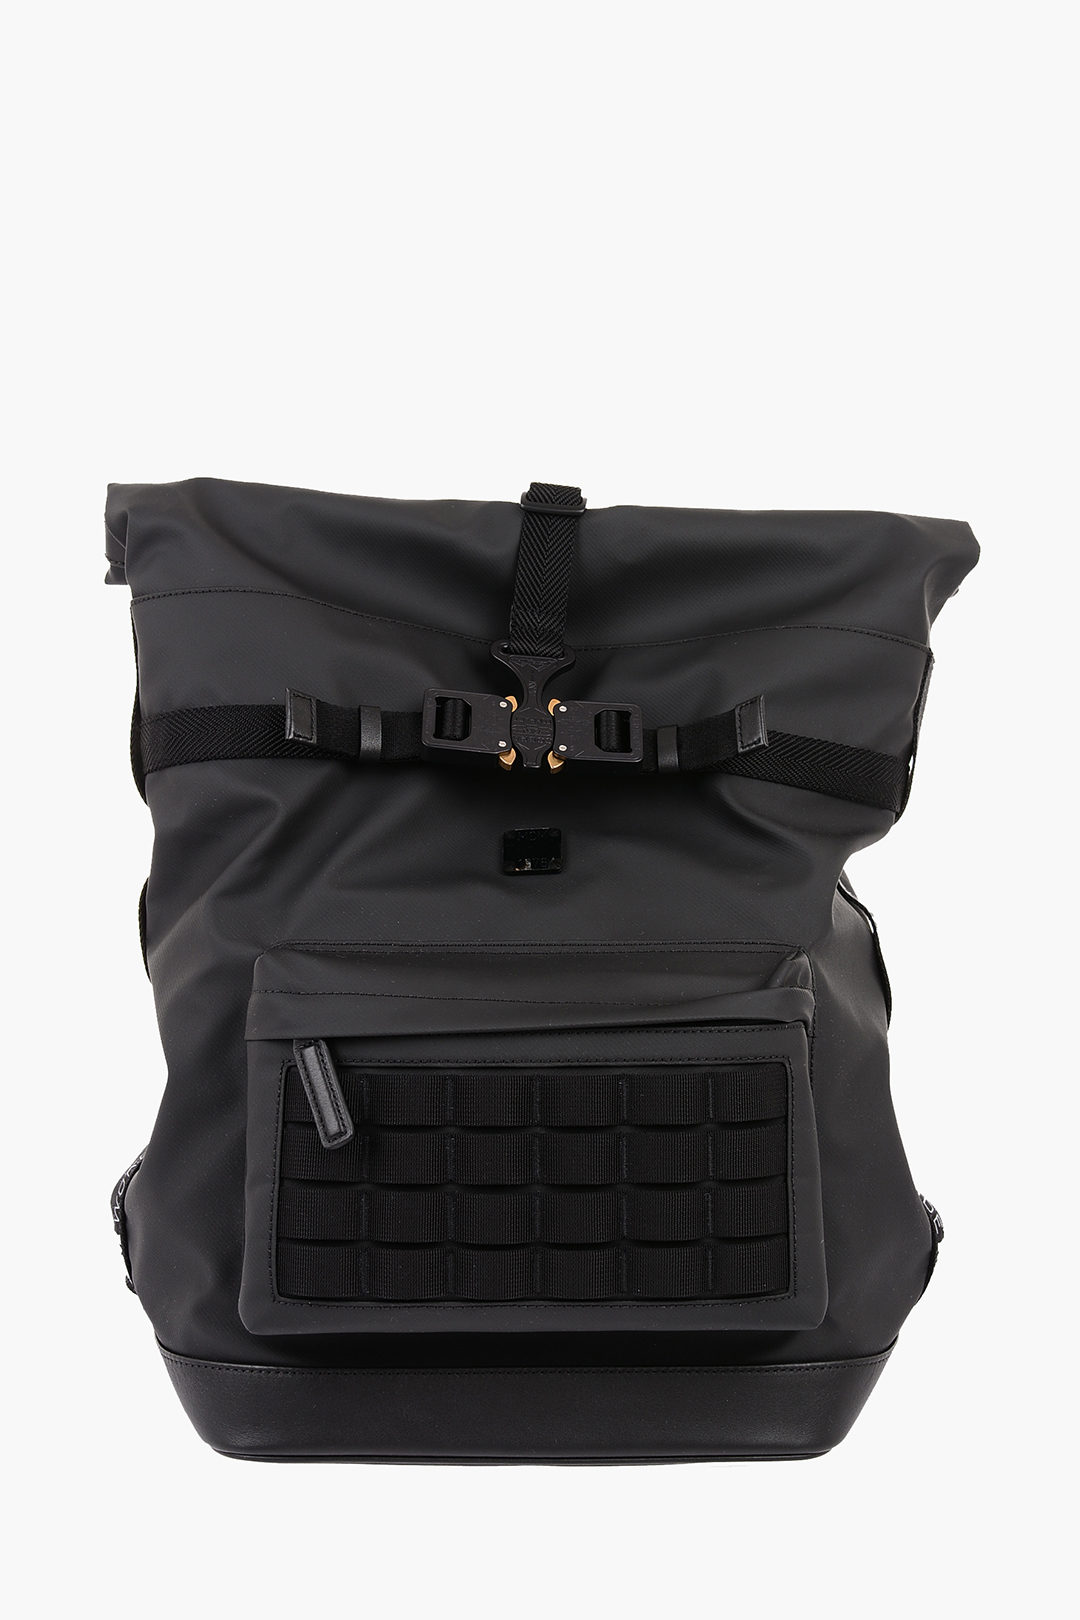 MCM Backpack and bumbags Men Leather Black